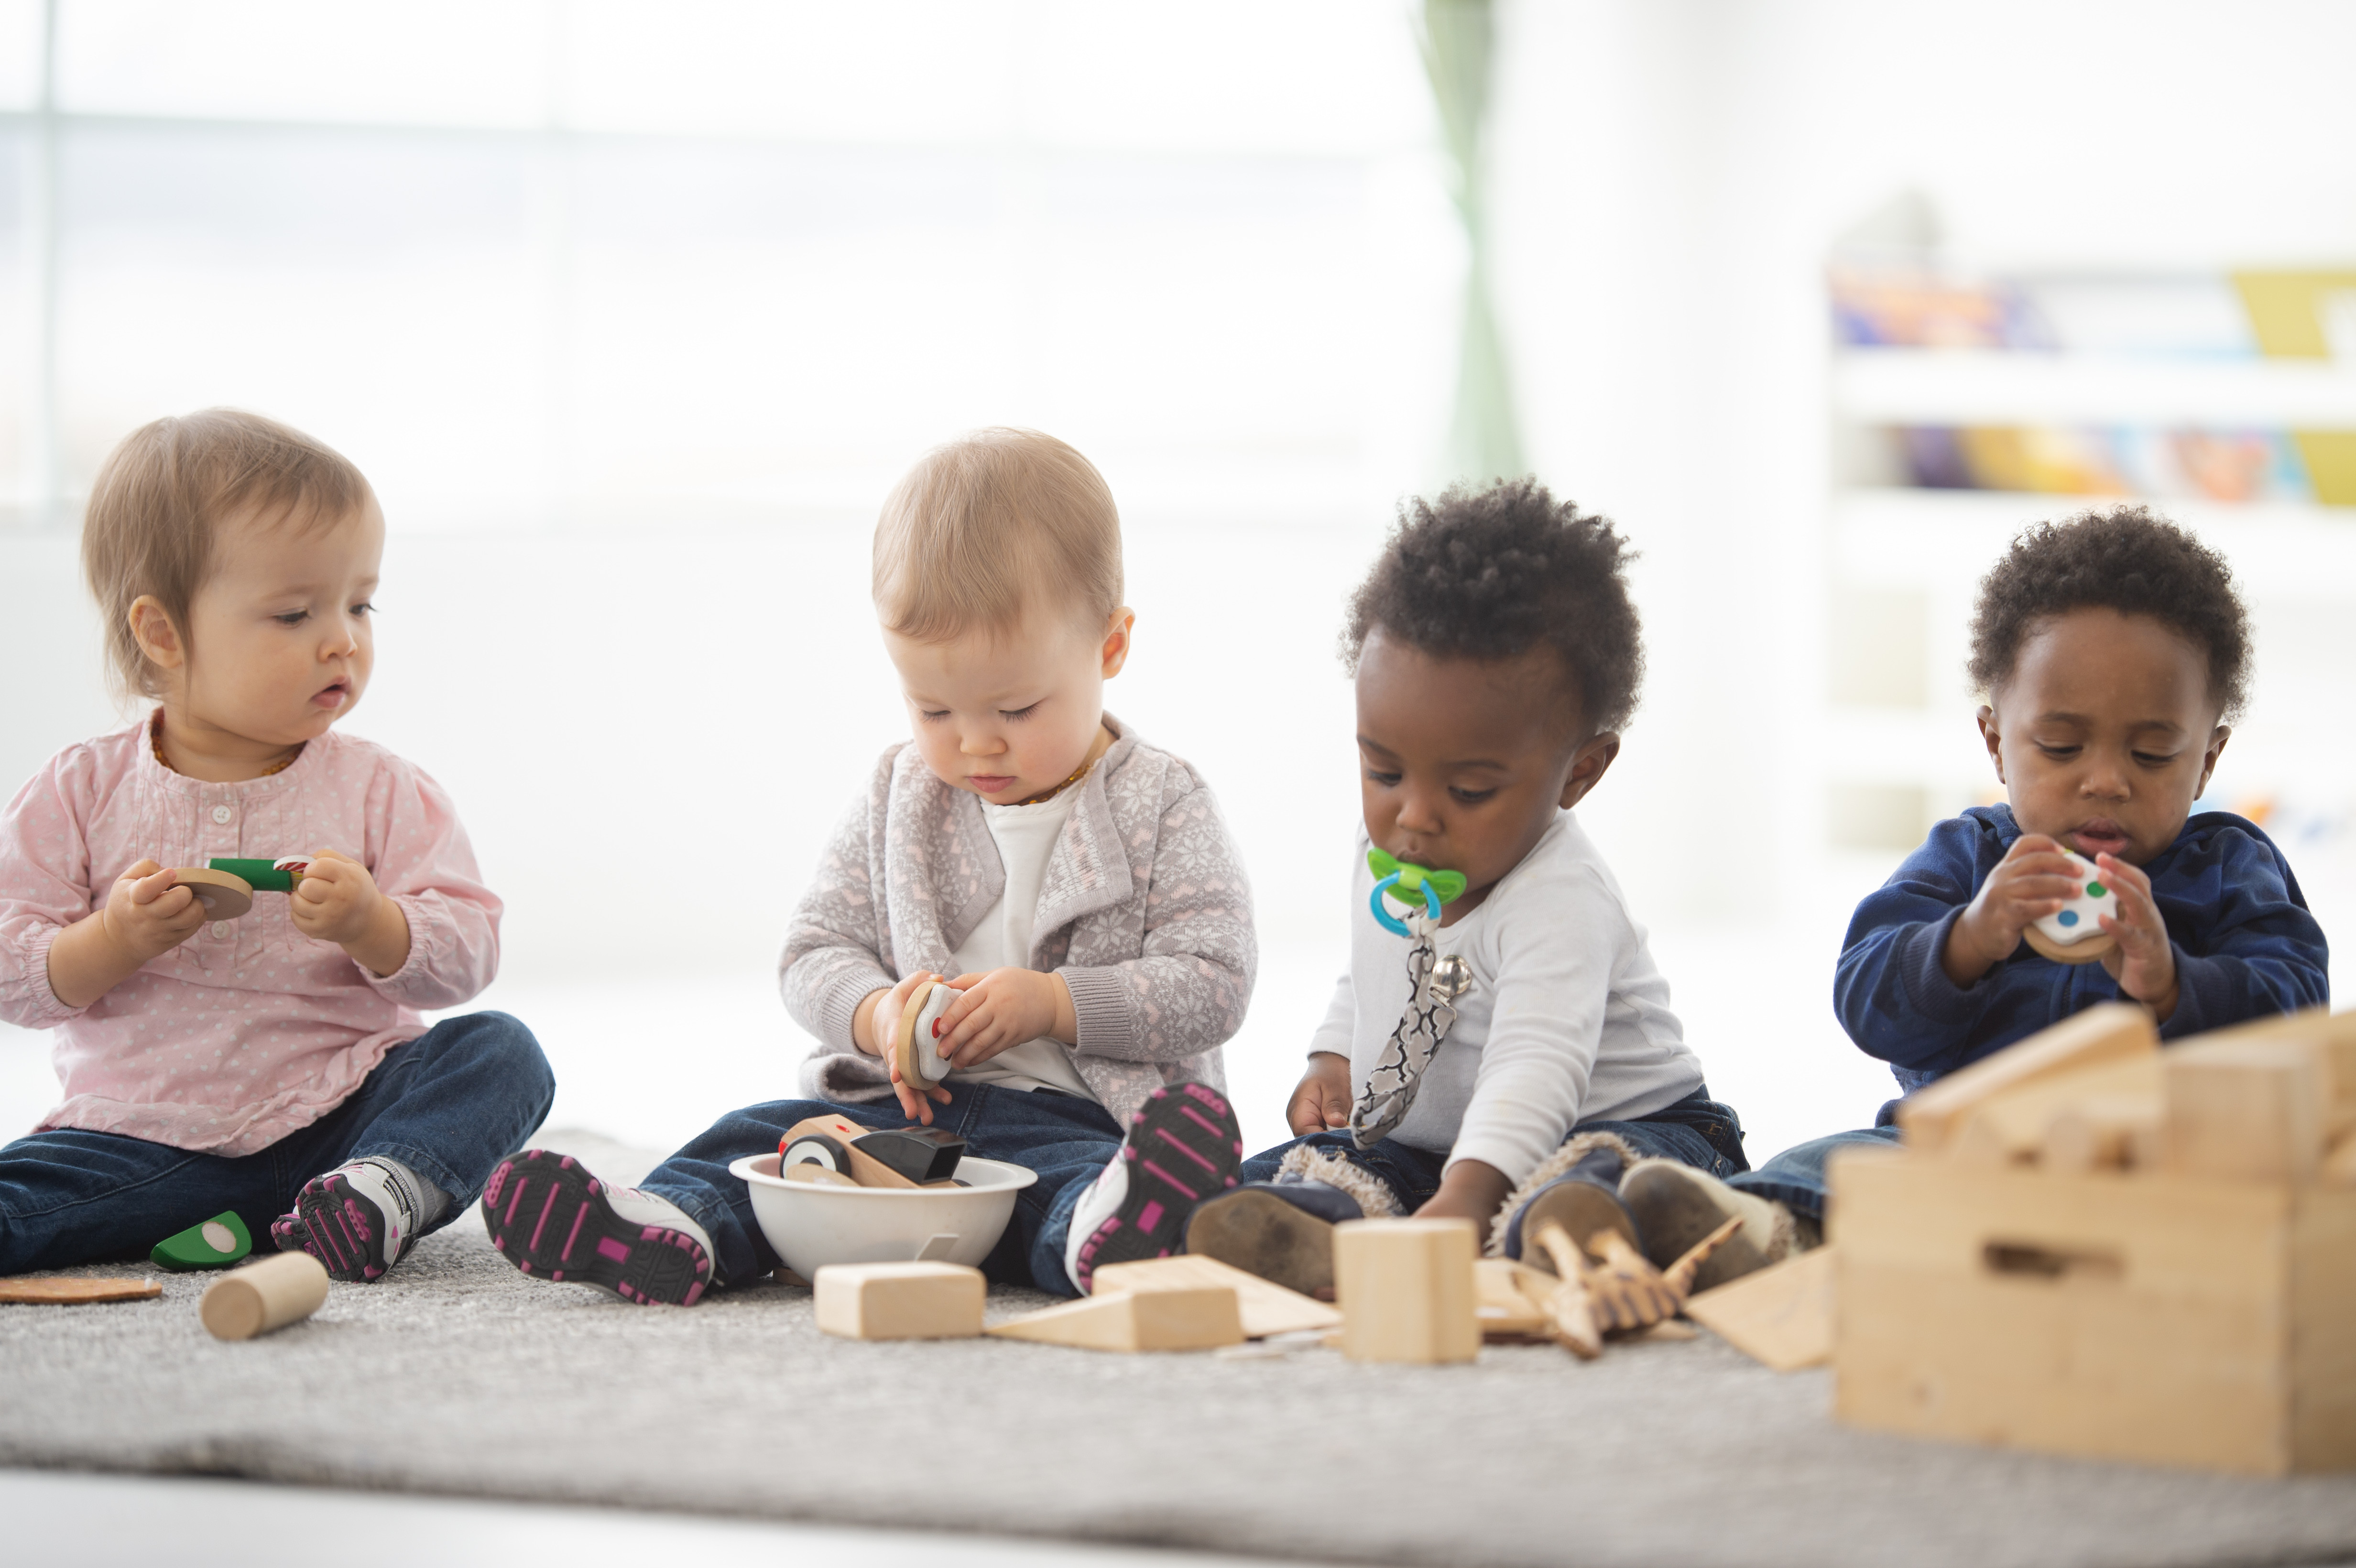 What my children are learning through playing with the new diverse